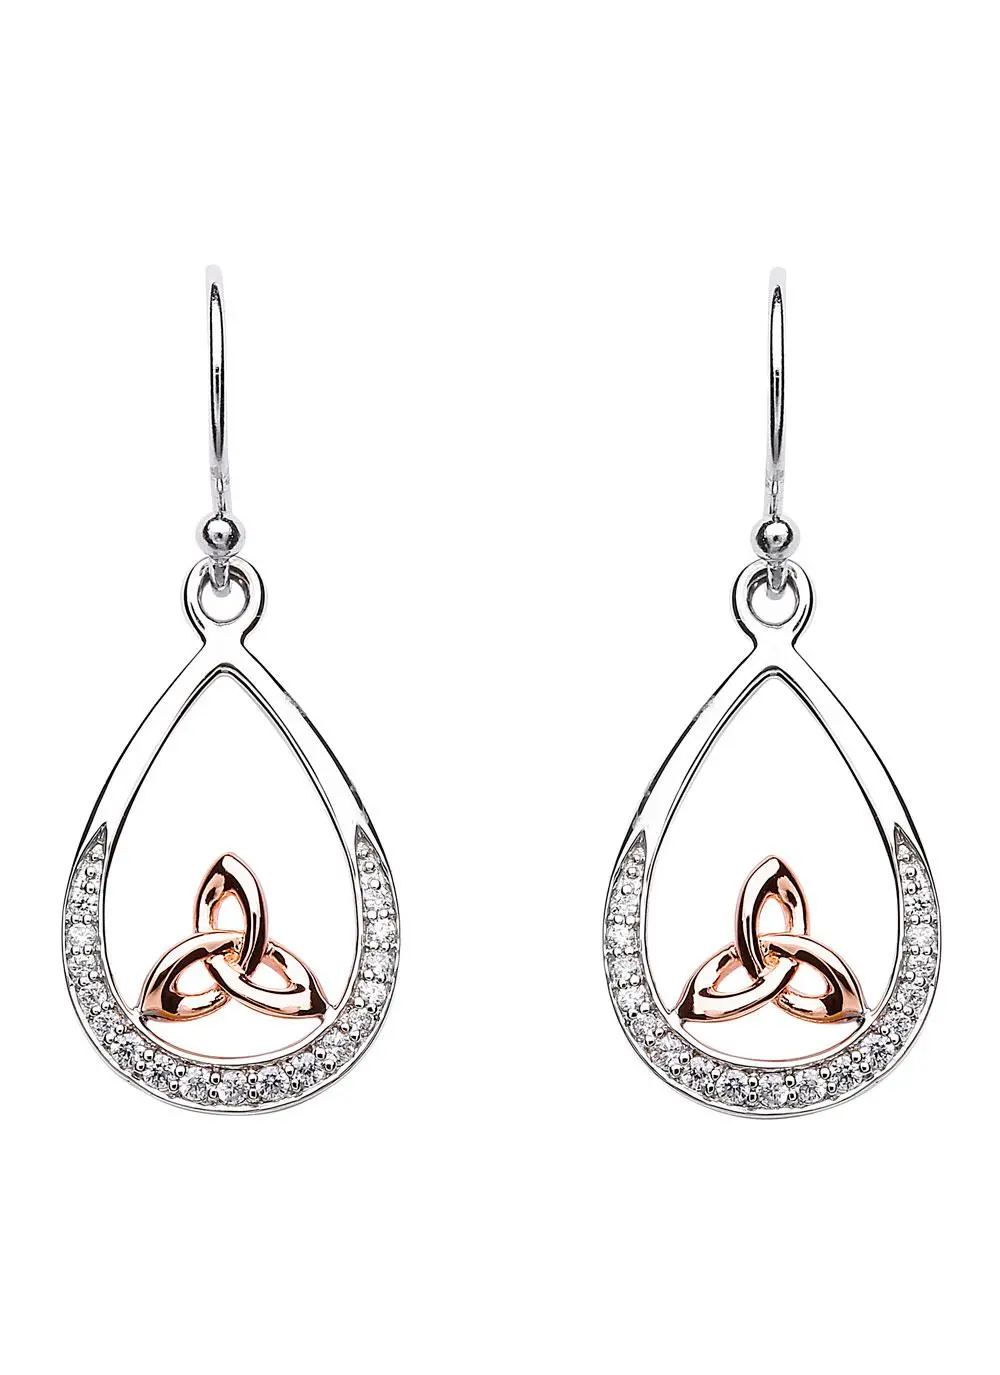 Irish Celtic Trinity Triquetra Knot Sterling Silver Drop Earrings | Shop in  Ireland | Gifts for all occasions | Irish Gifts |